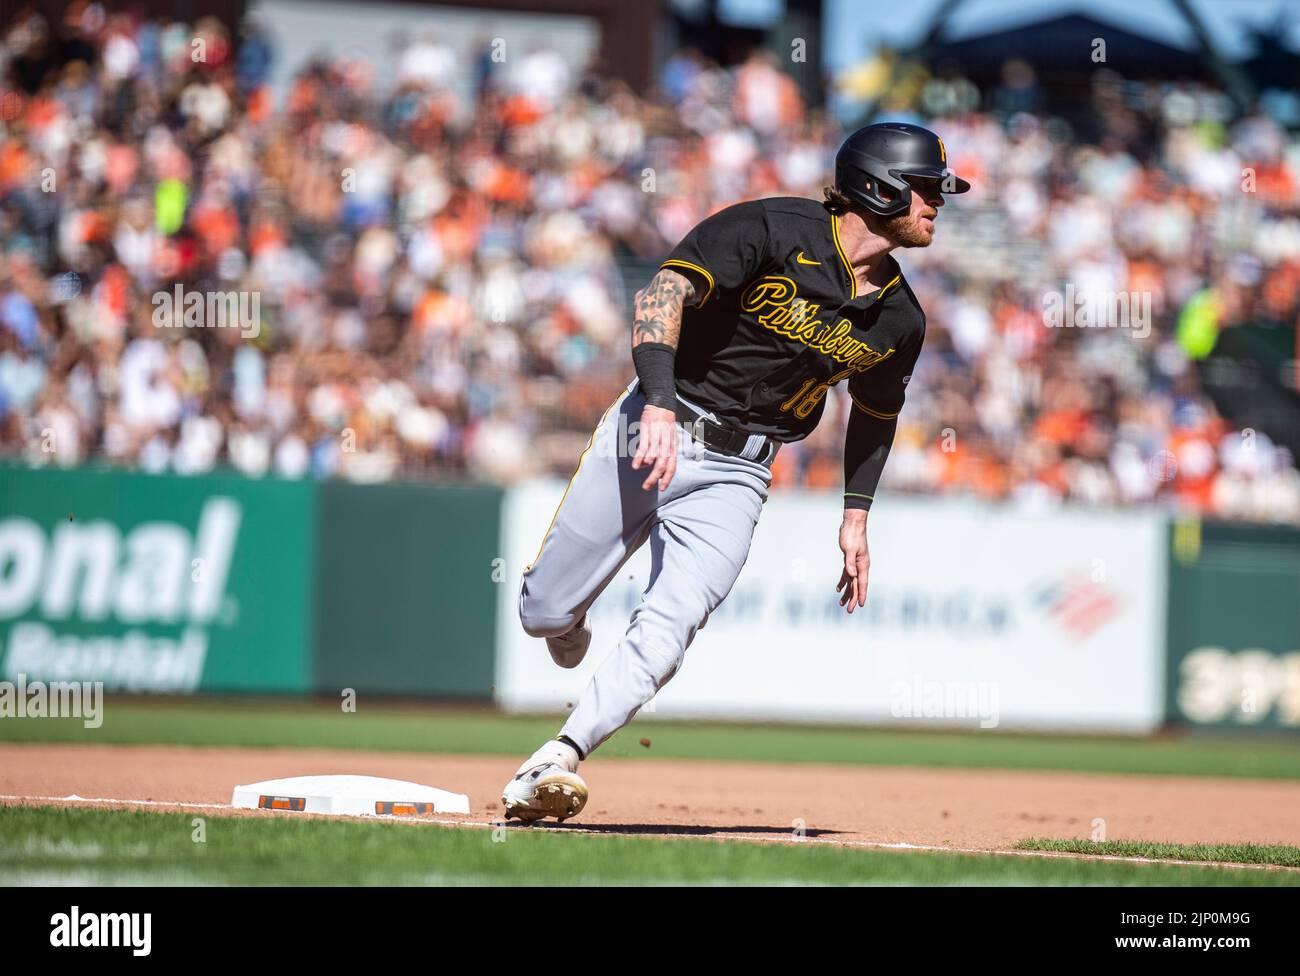 San Francisco, USA. August 14 2022 San Francisco CA, U.S.A. Pittsburgh left fielder Ben Gamel (18) rounds third heading for home during MLB NL west game between the Pittsburgh Pirates and the San Francisco Giants. The Giants beat the Pirates 8-7 at Oracle Park San Francisco Calif. Thurman James/CSM Credit: Cal Sport Media/Alamy Live News Stock Photo